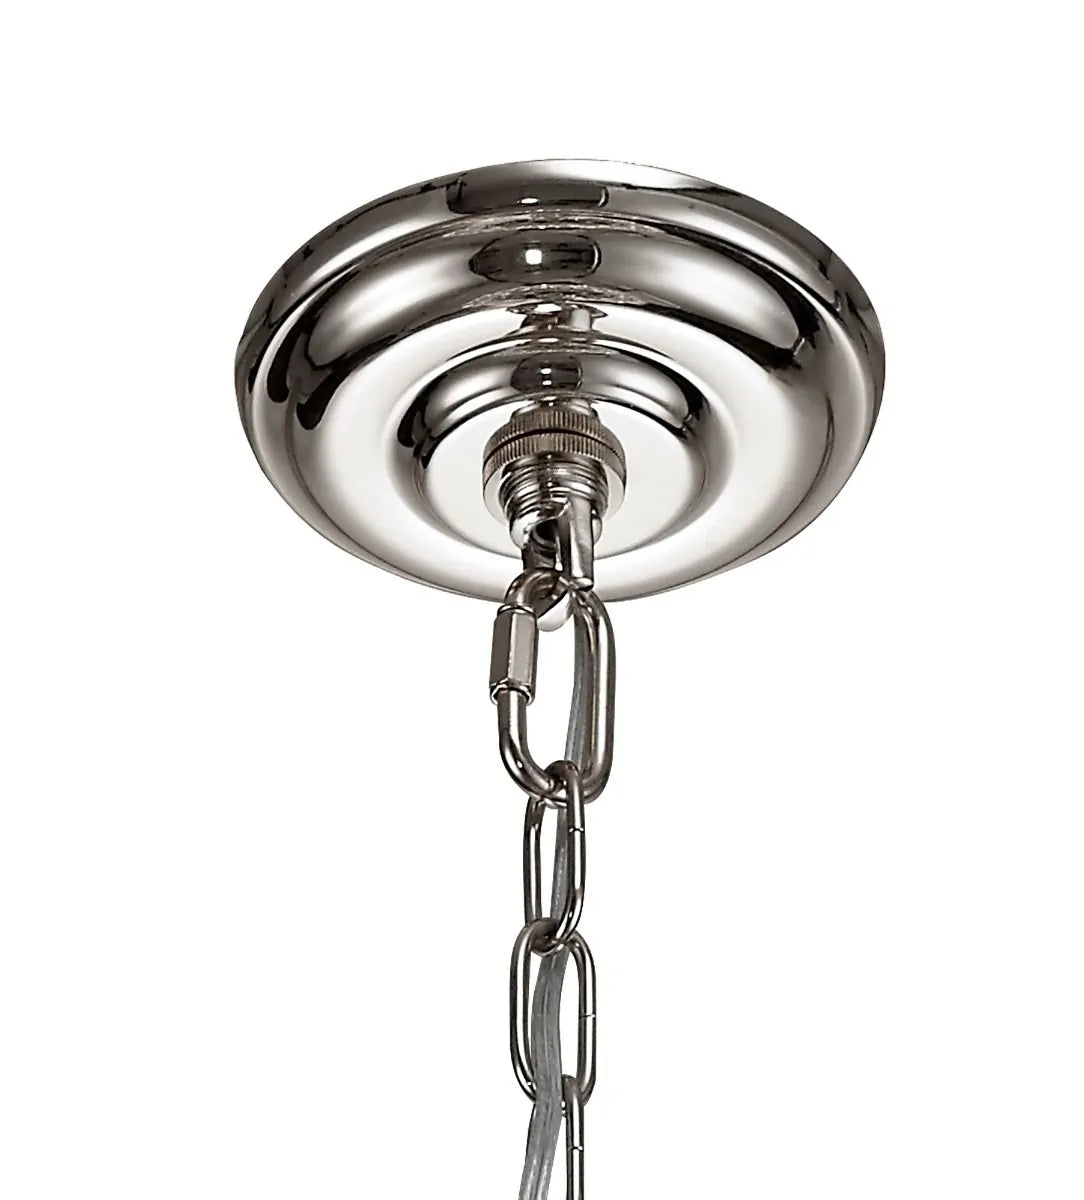 Coniston IL32800 Crystal 3 Light Small Pendant with Polished Chrome Frame by Diyas